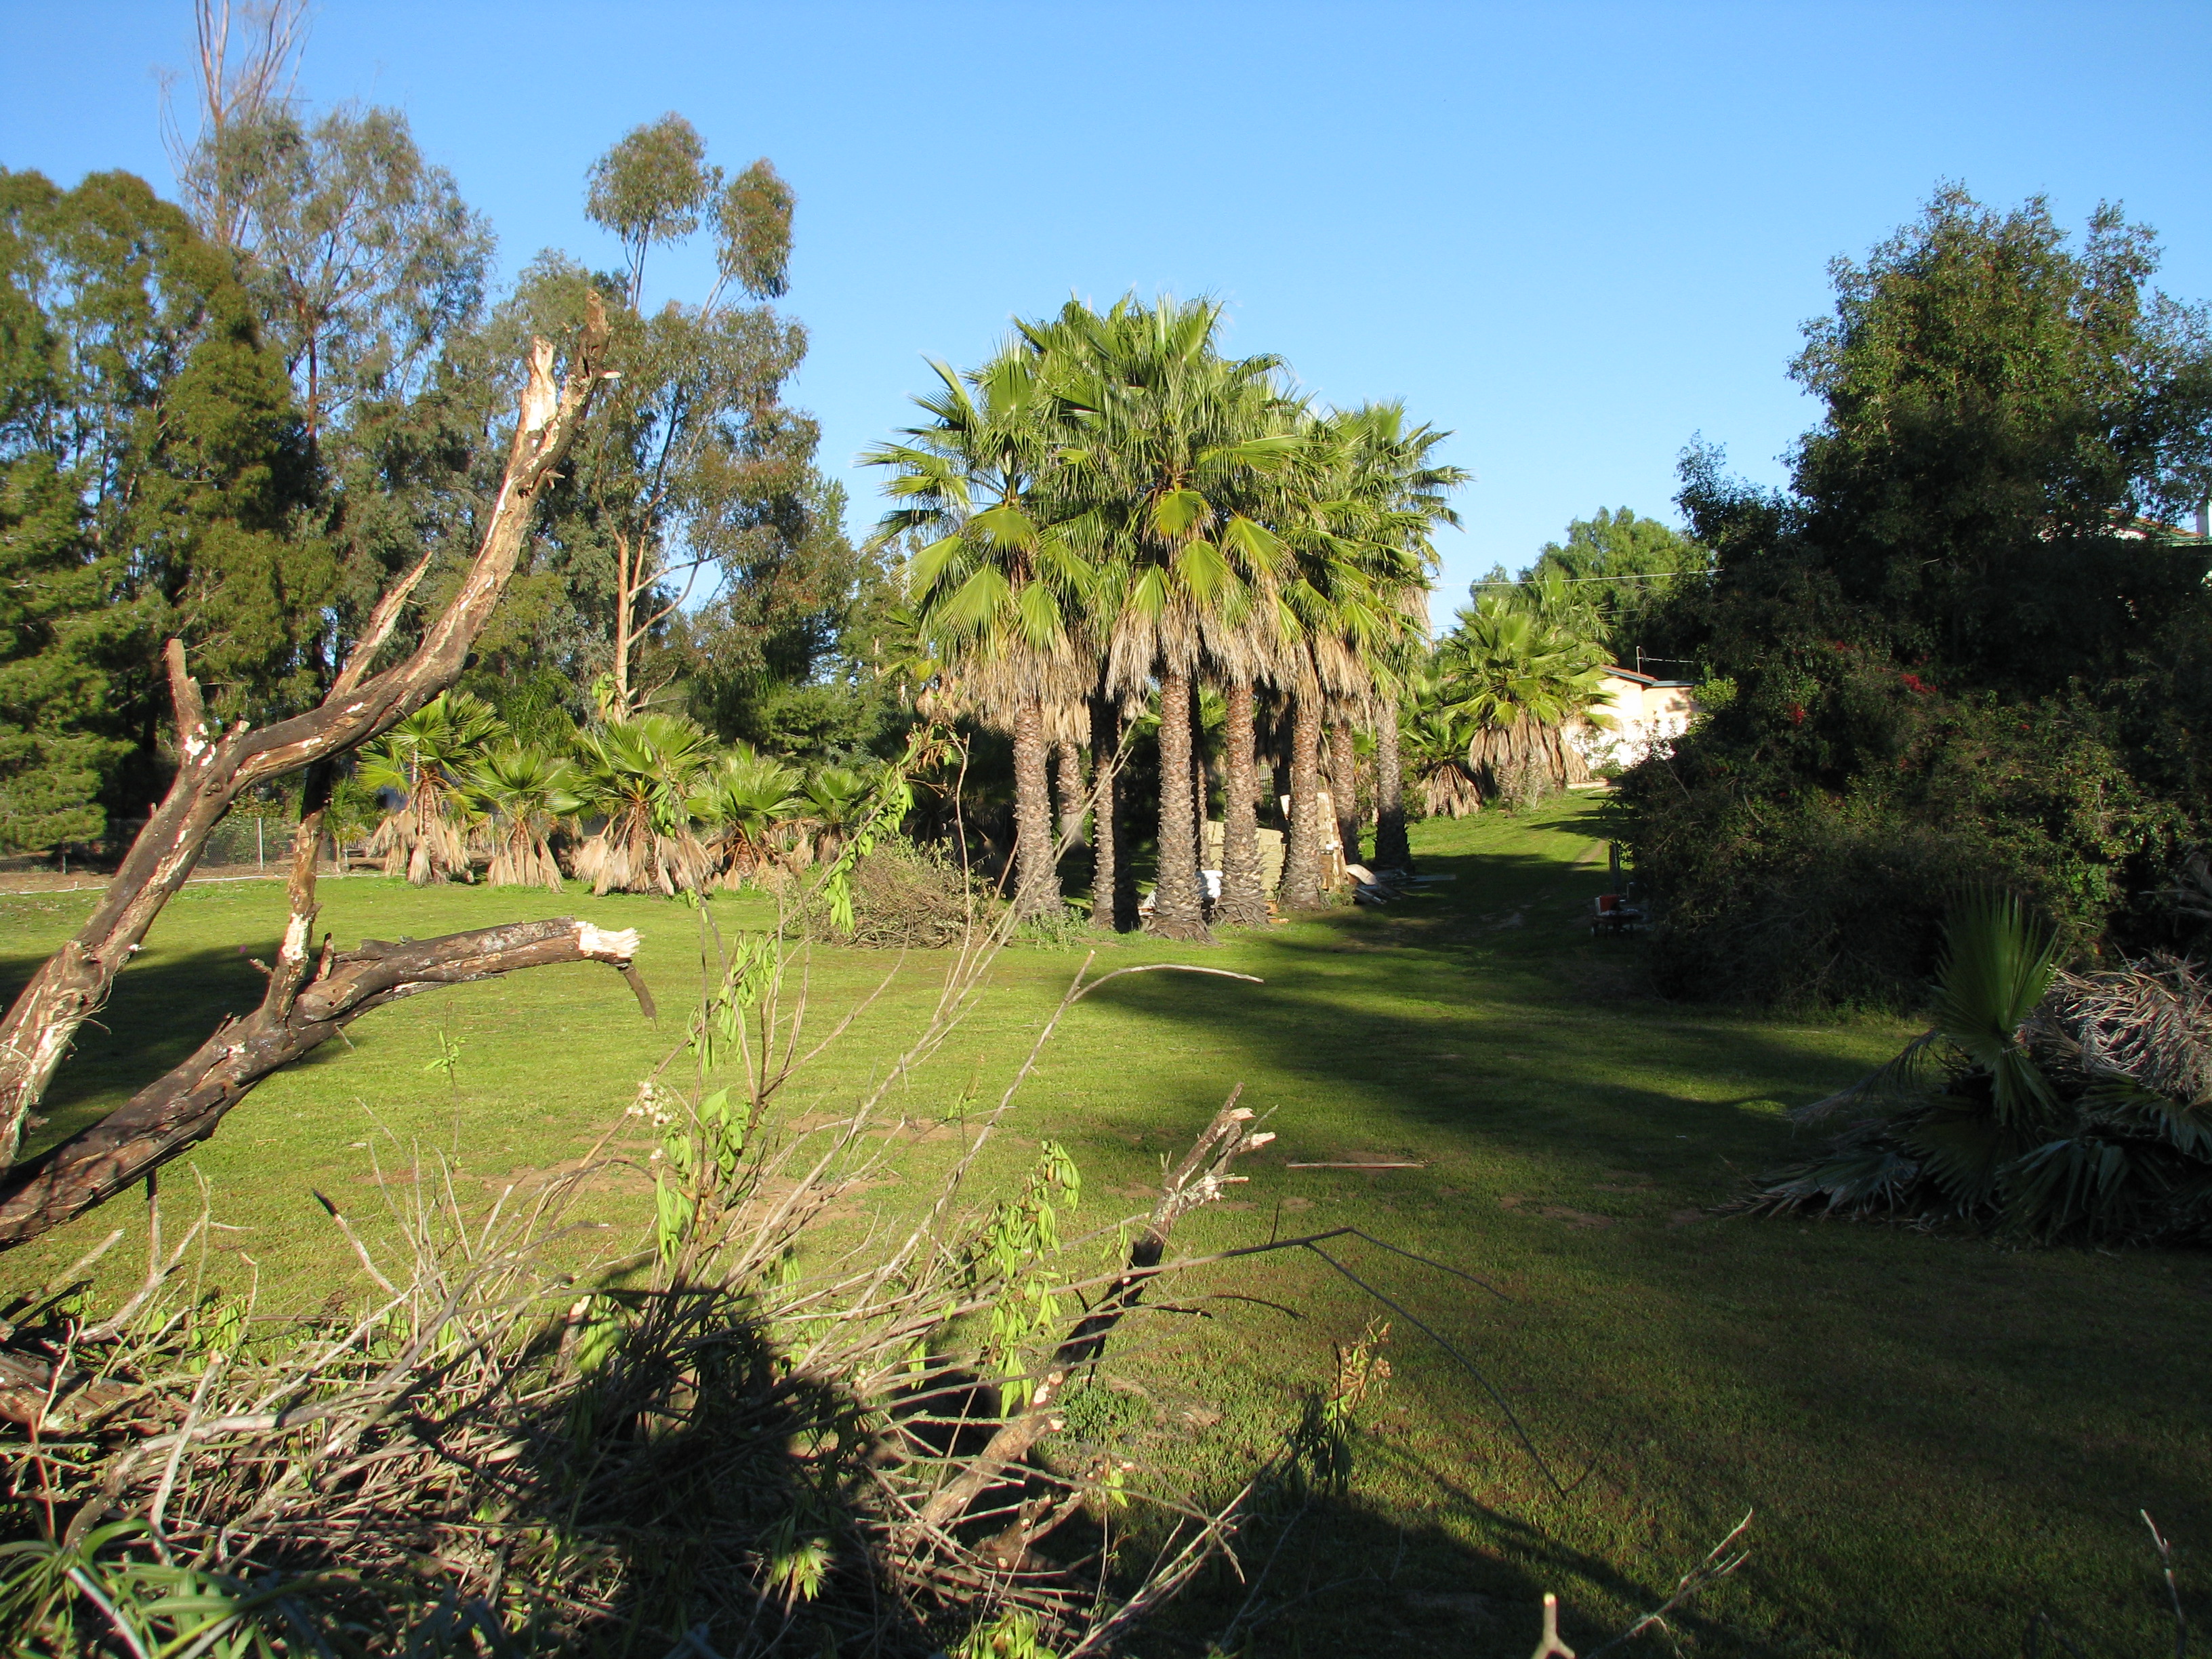 Lots of mowing and palm frond removal.